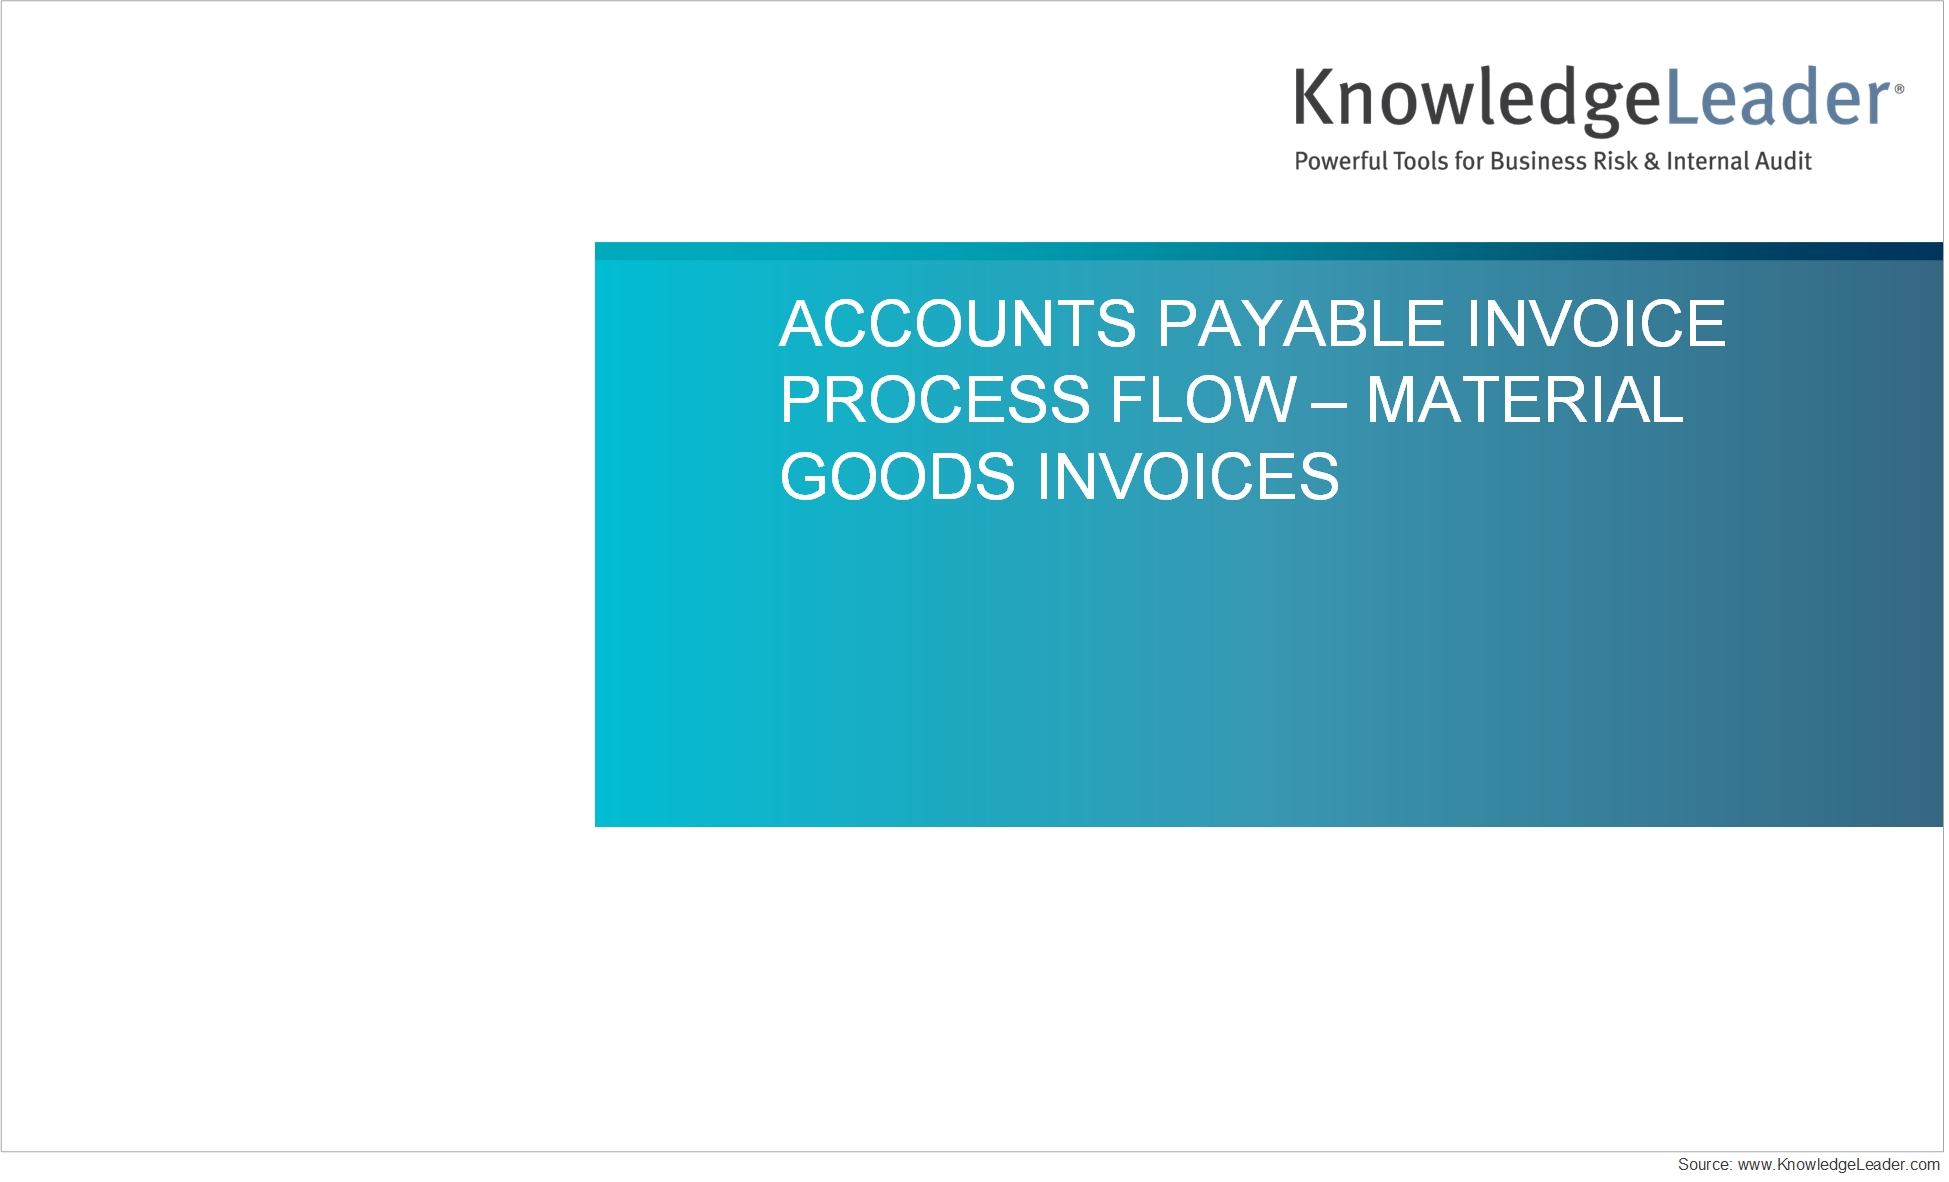 Screenshot of the first page of Accounts Payable Invoice Process Flow - Material Goods Invoices